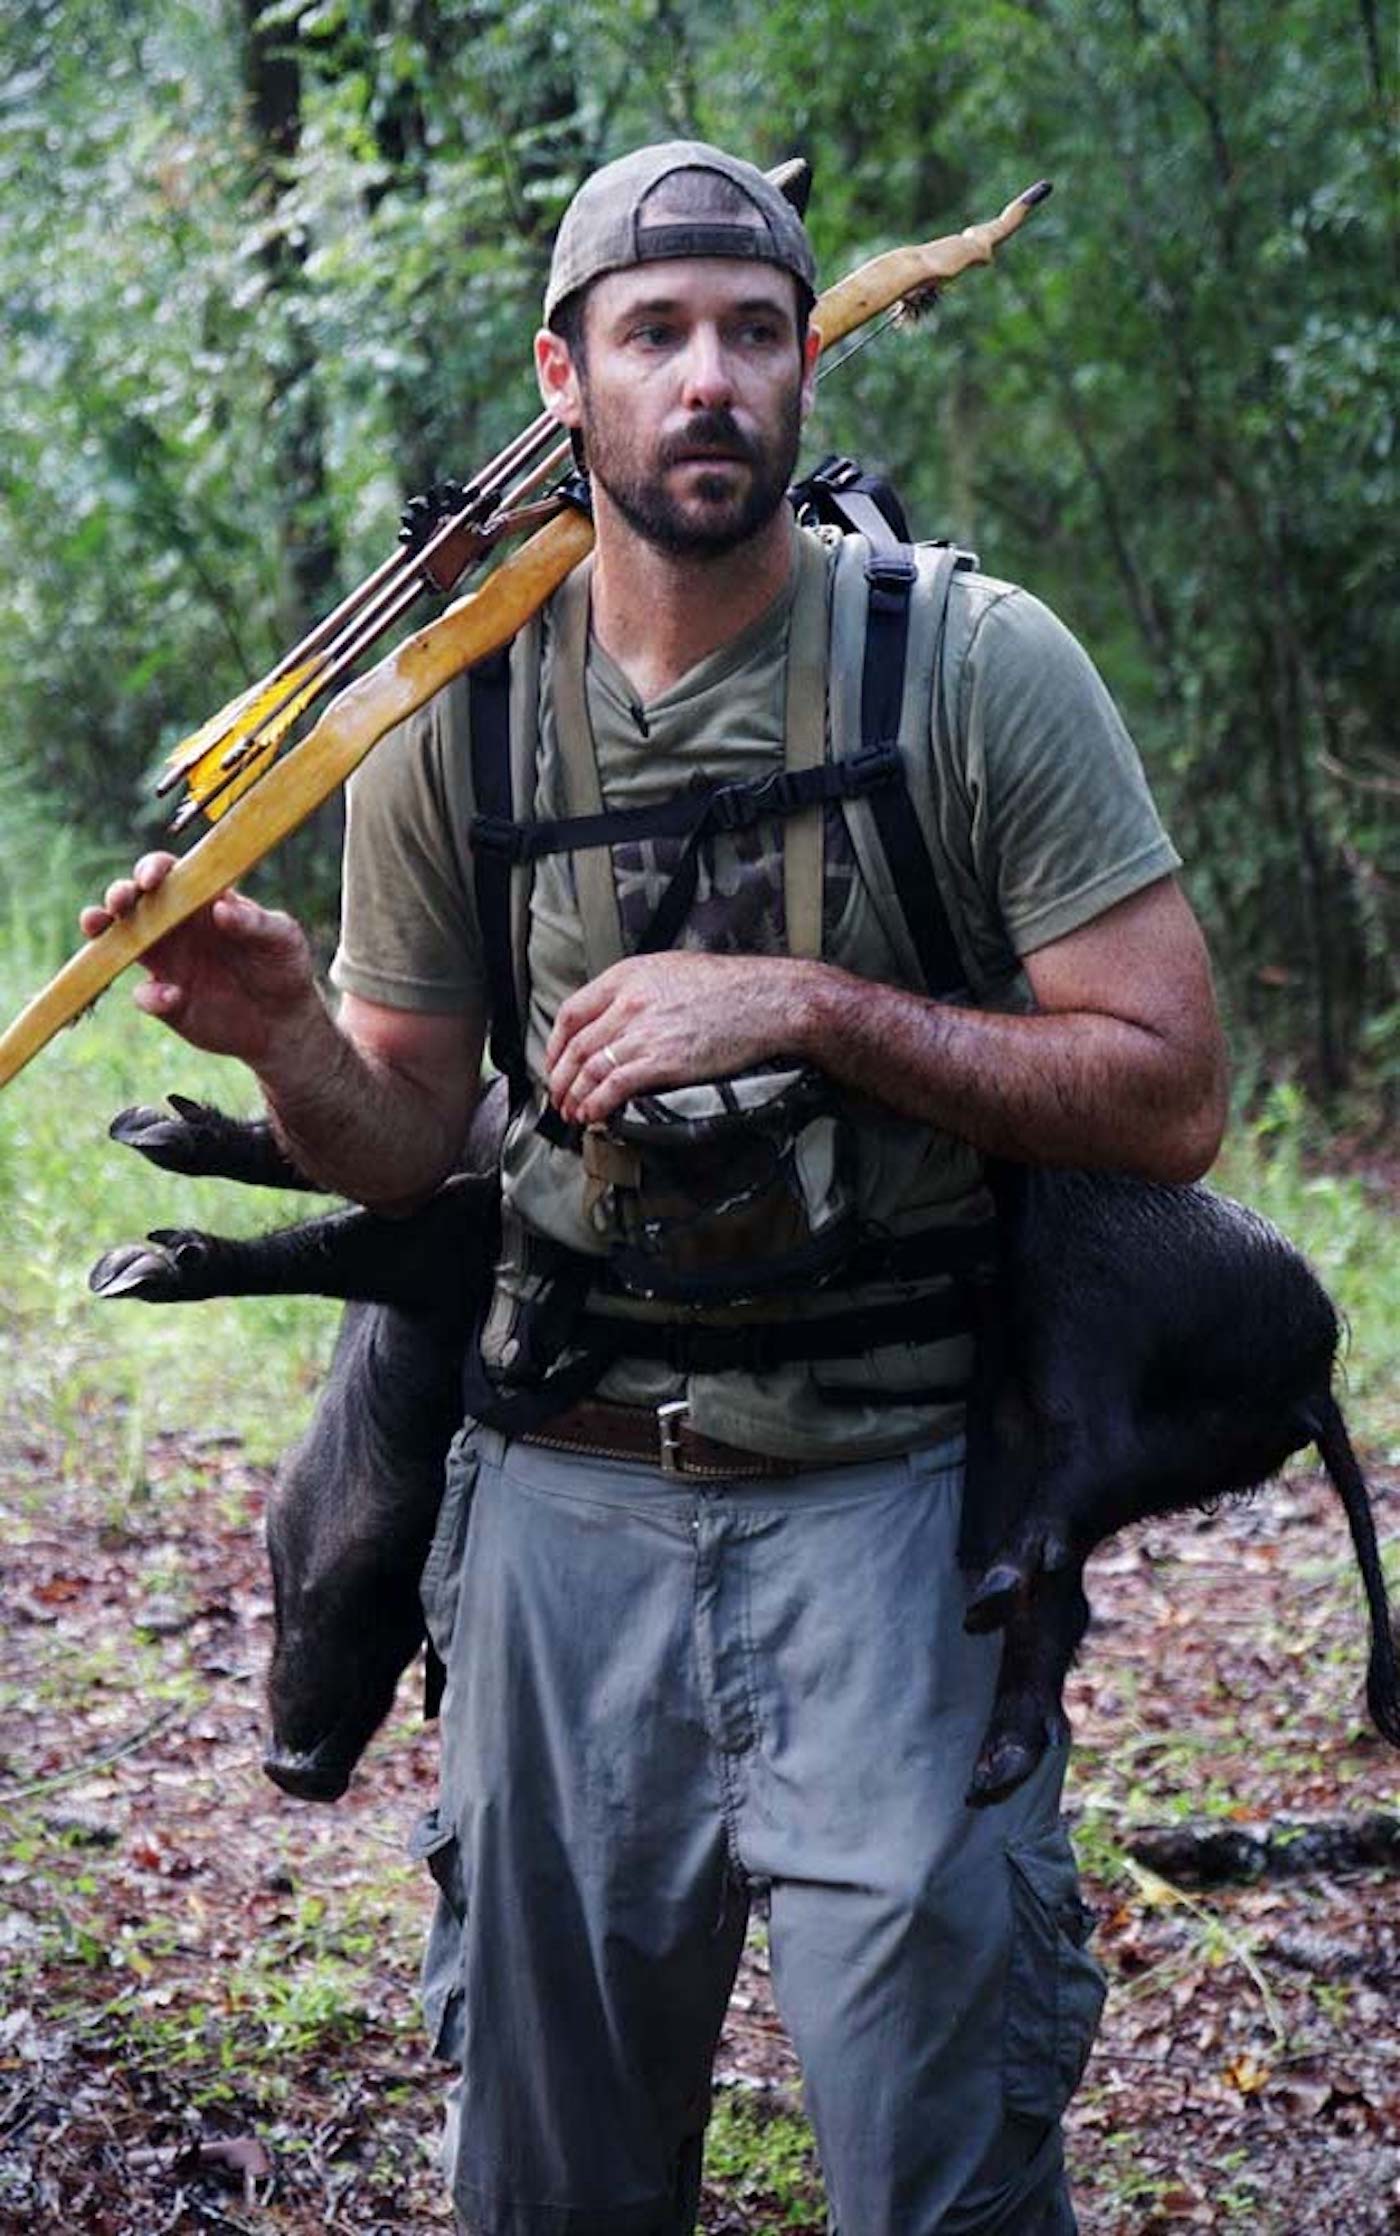 The author with a homemade bow hunting a pig